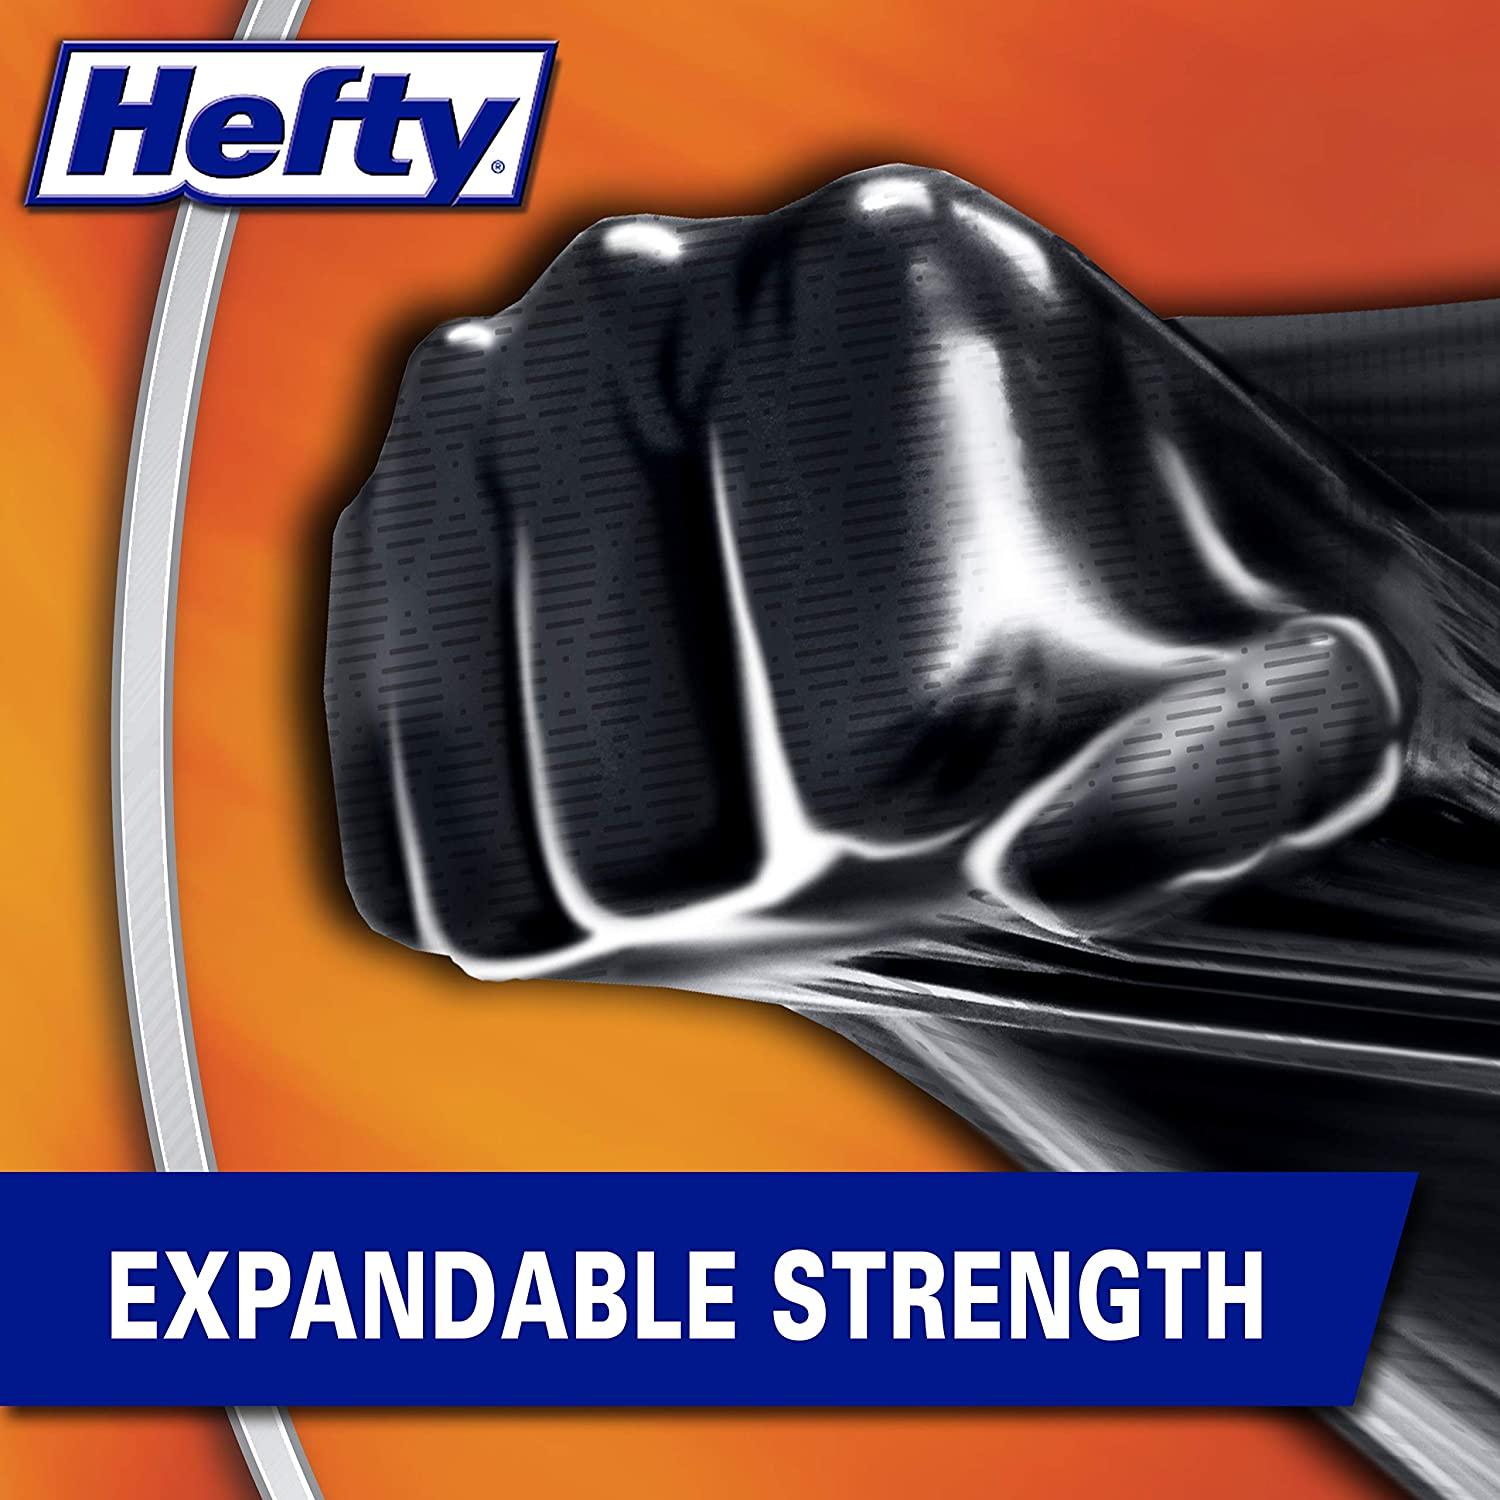 Hefty Ultra Strong Multipurpose Large Trash Bags, Black, White Pine Breeze Scent, 30 Gallon, 25 Count (Pack of 3)